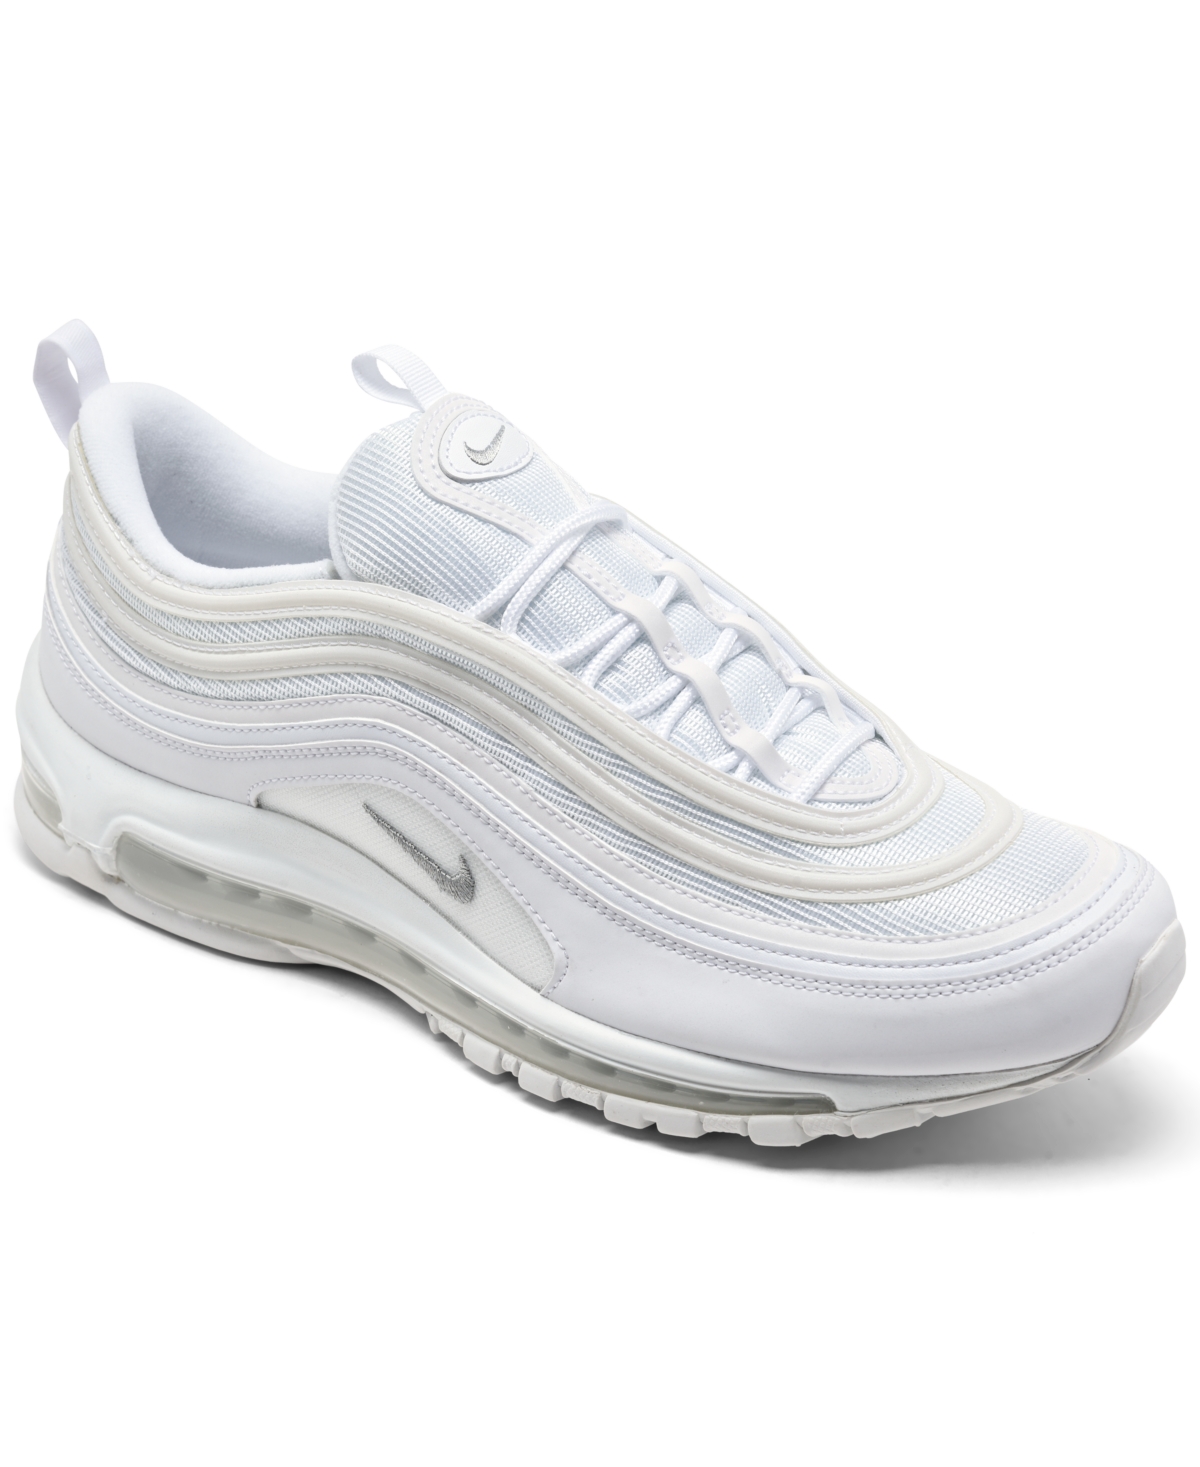 Nike Men's Air Max 97 Running Sneakers from Finish Line